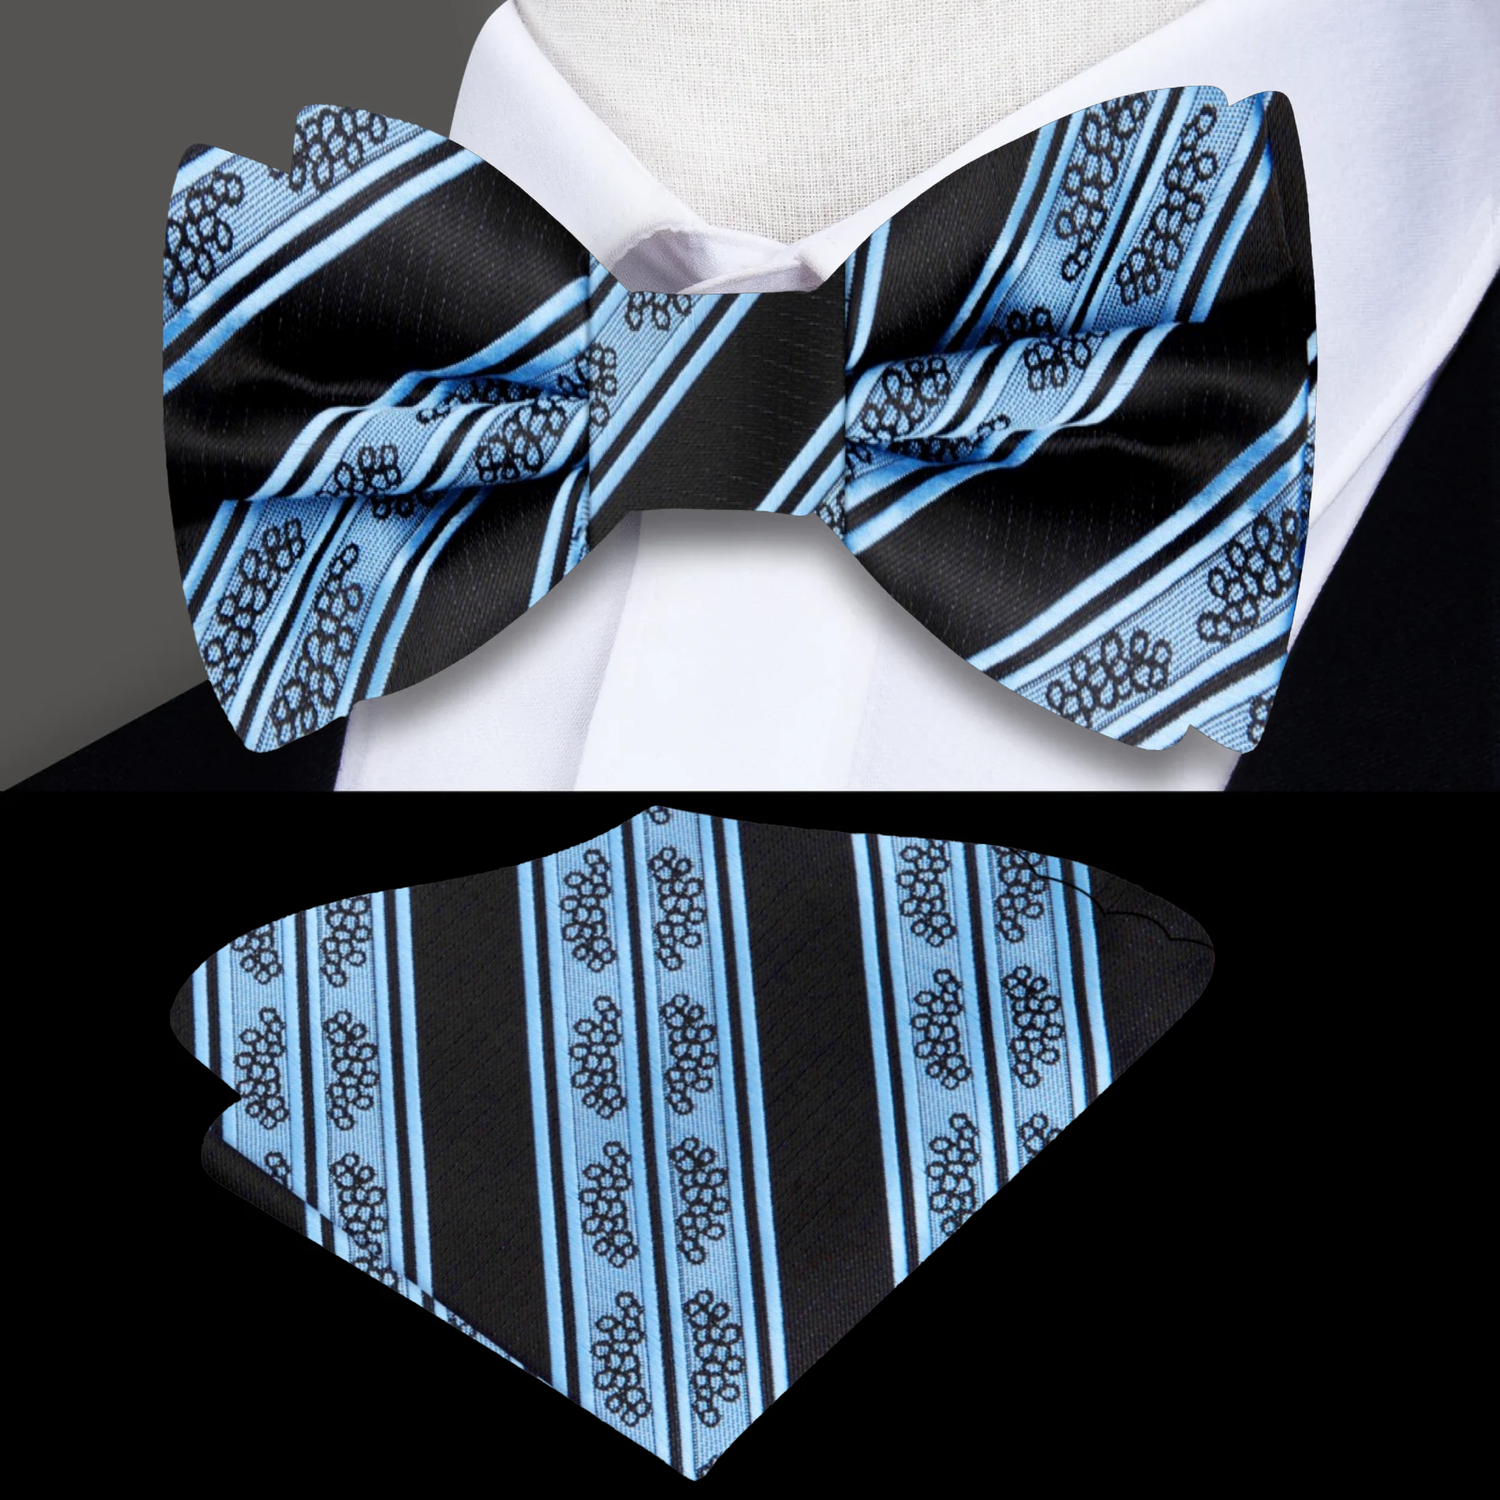 Black with Light Blue Intricate Design Bow Tie and Pocket Square.